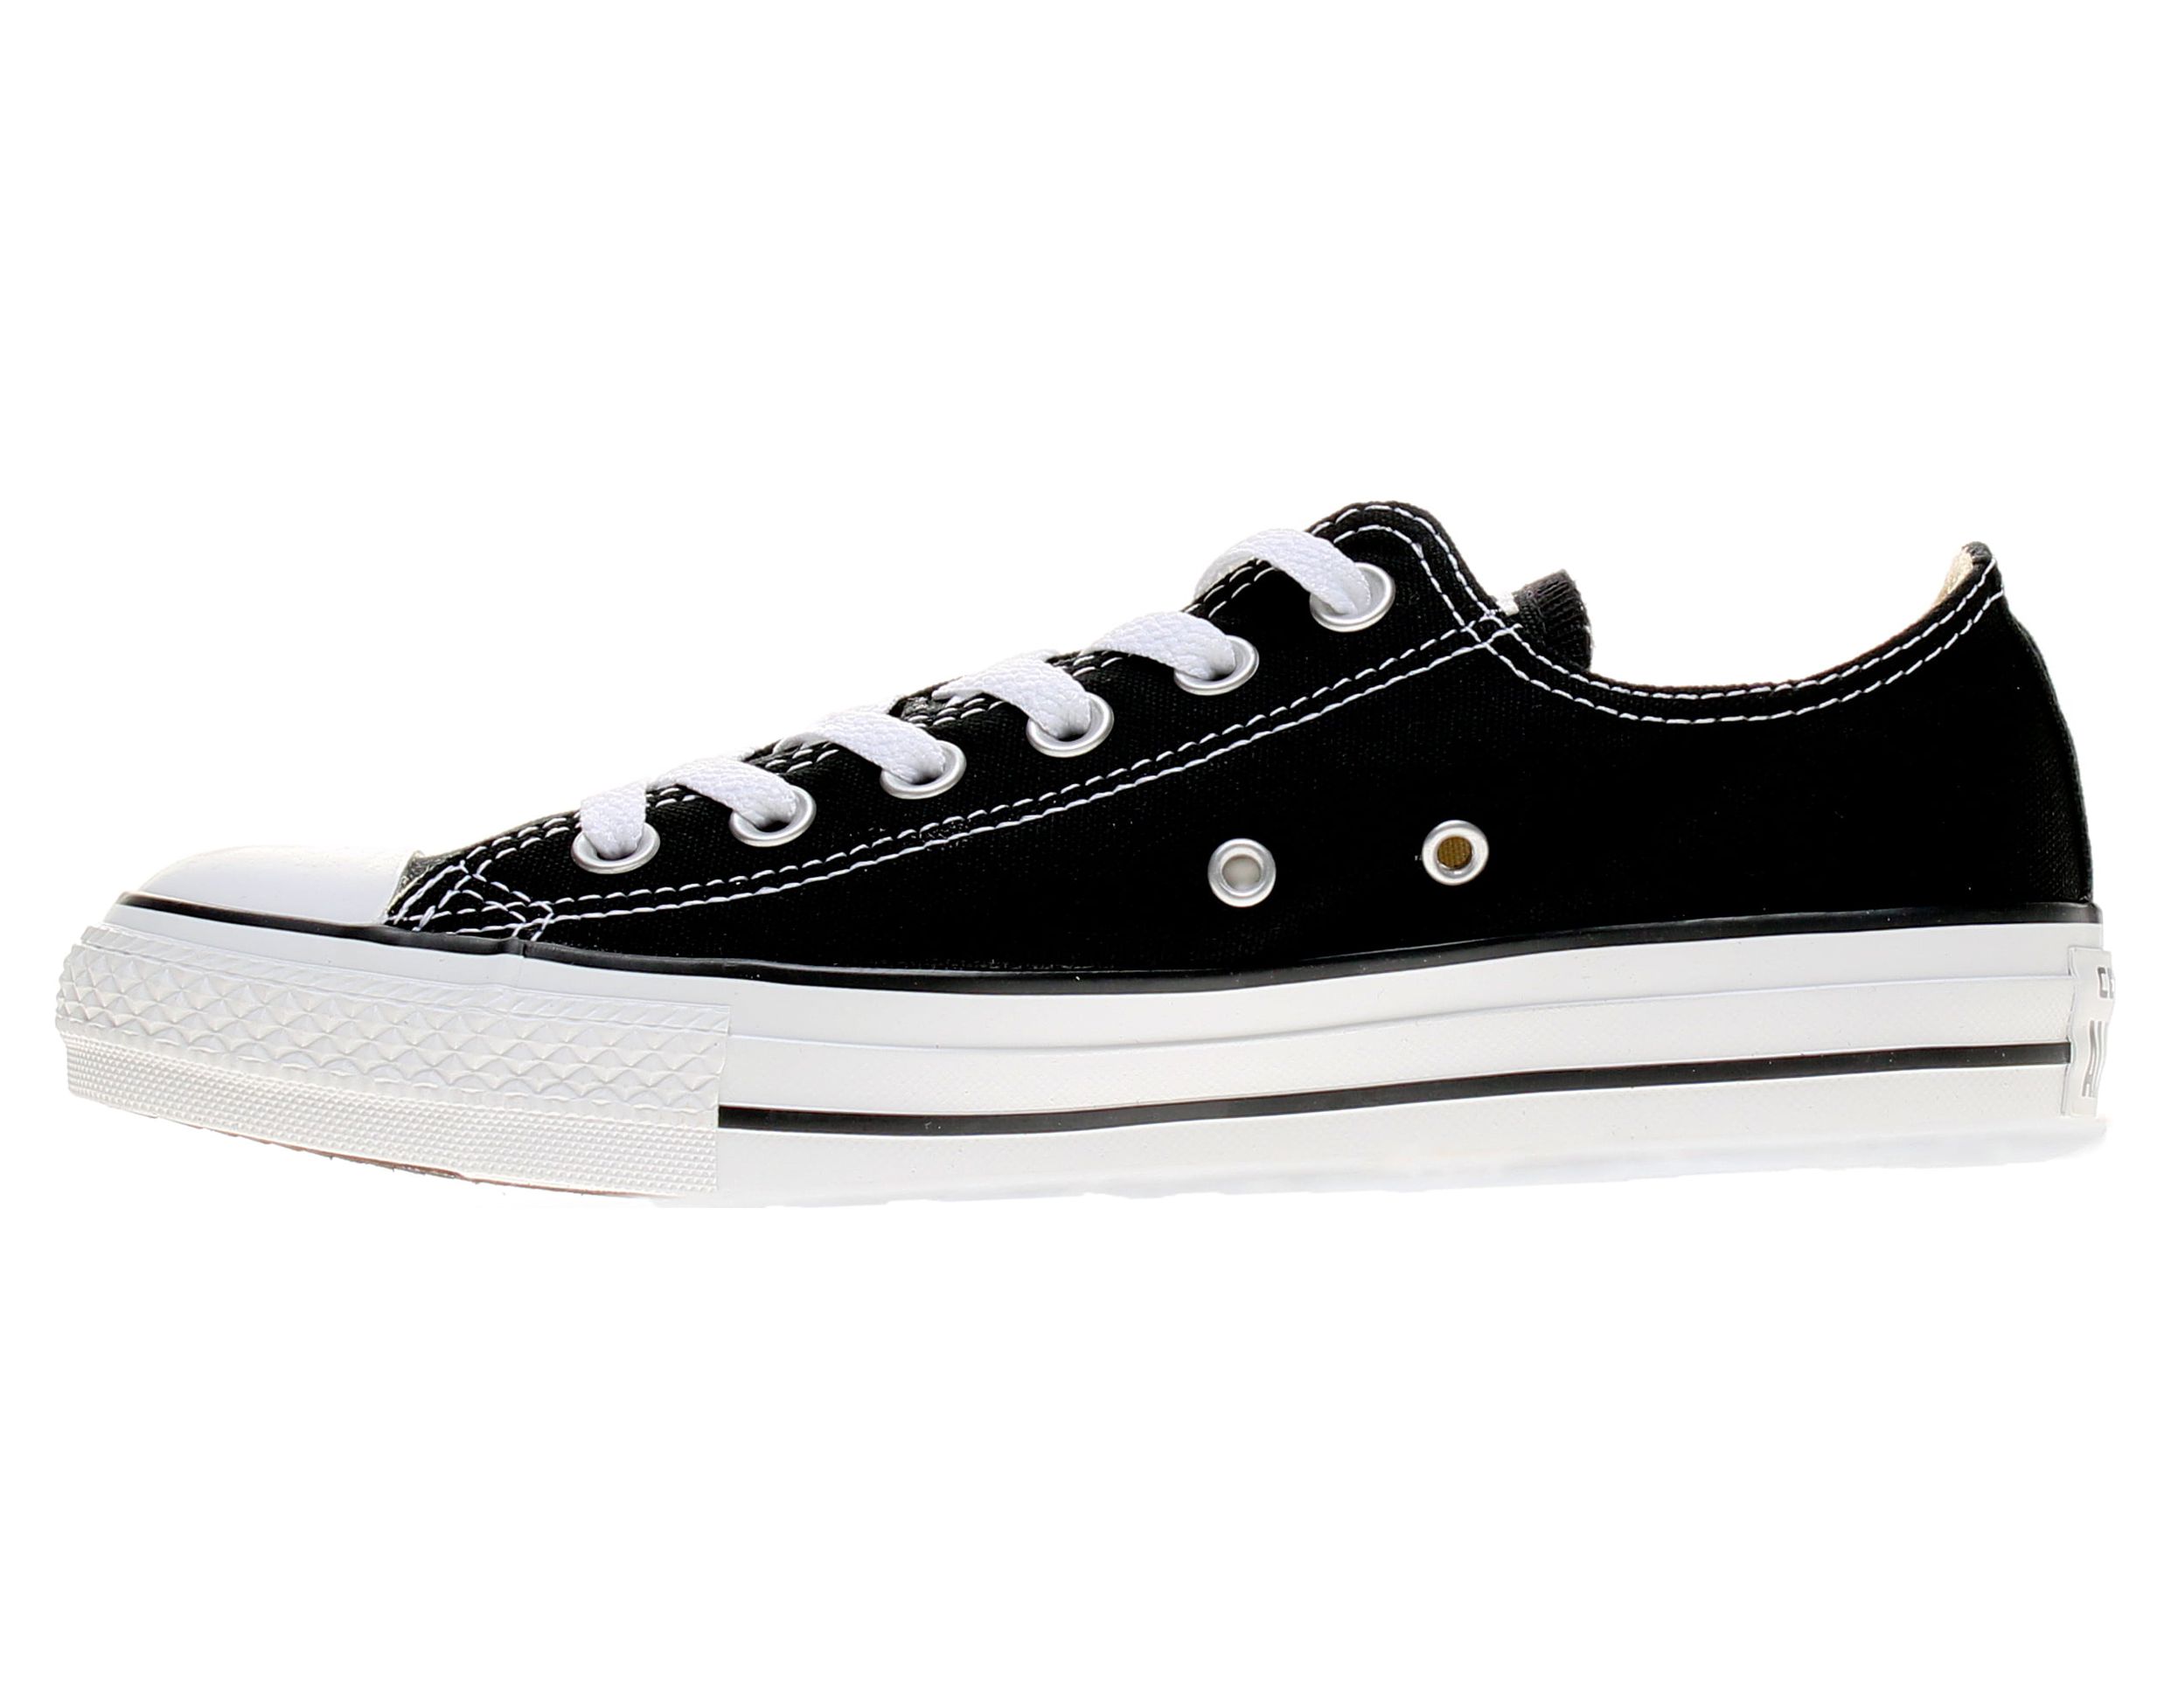 Converse Chuck Taylor All Star Low Top (International Version) Sneaker - image 3 of 6